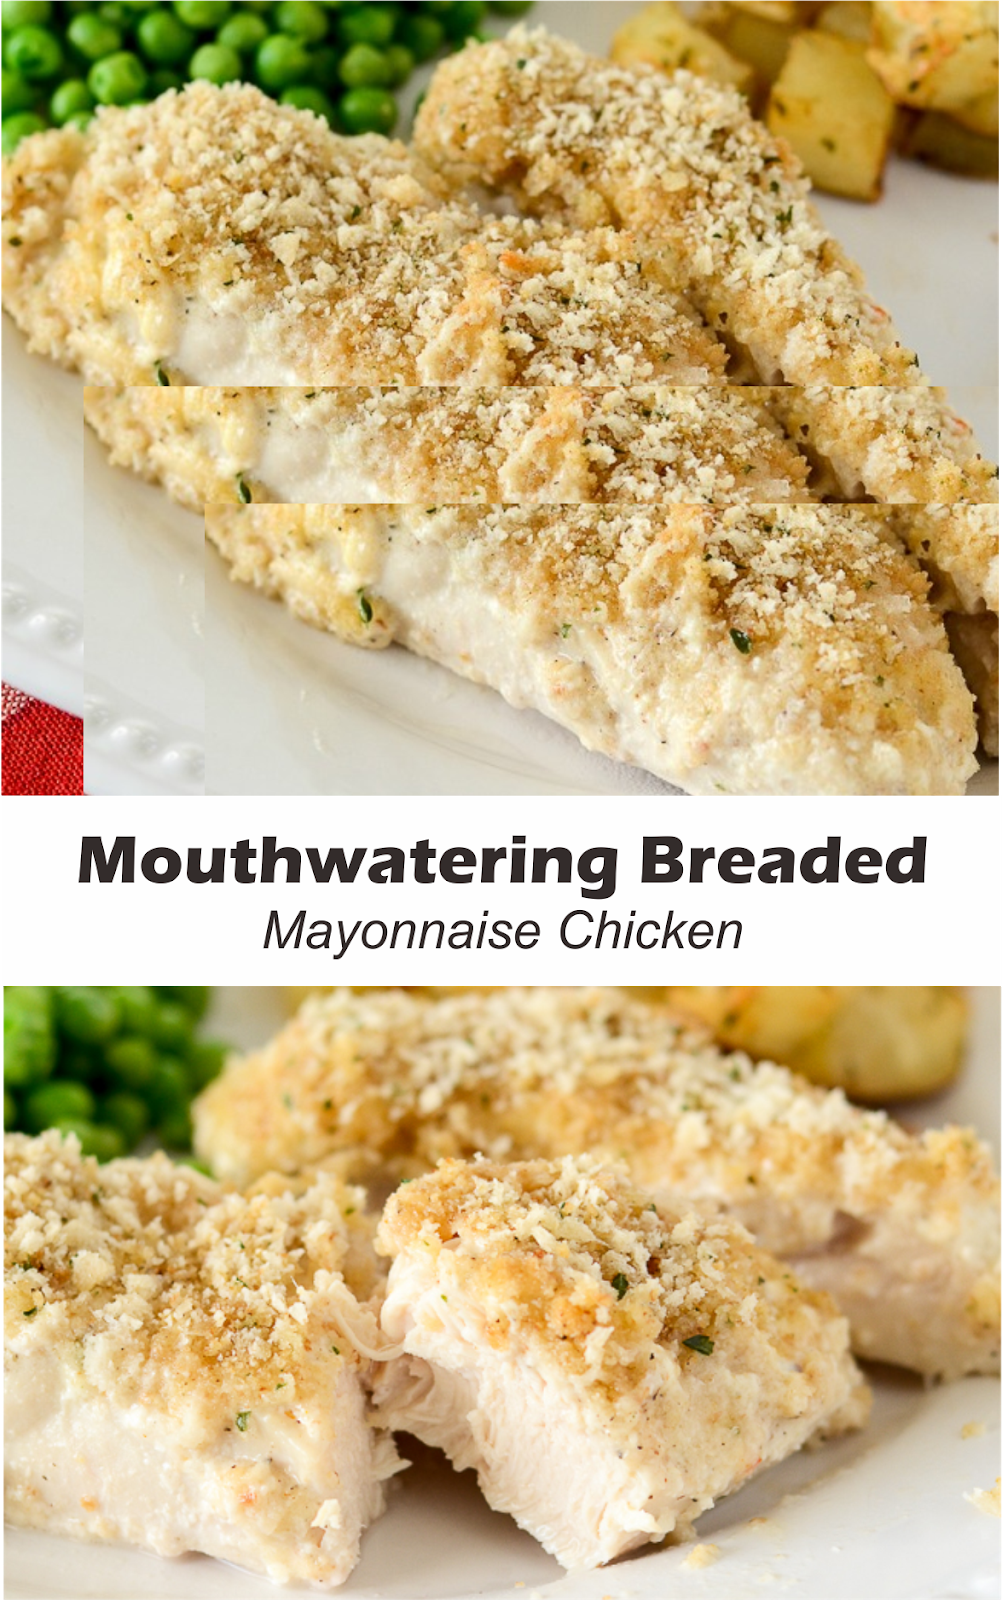 Mouthwatering Breaded Mayonnaise Chicken | Think food